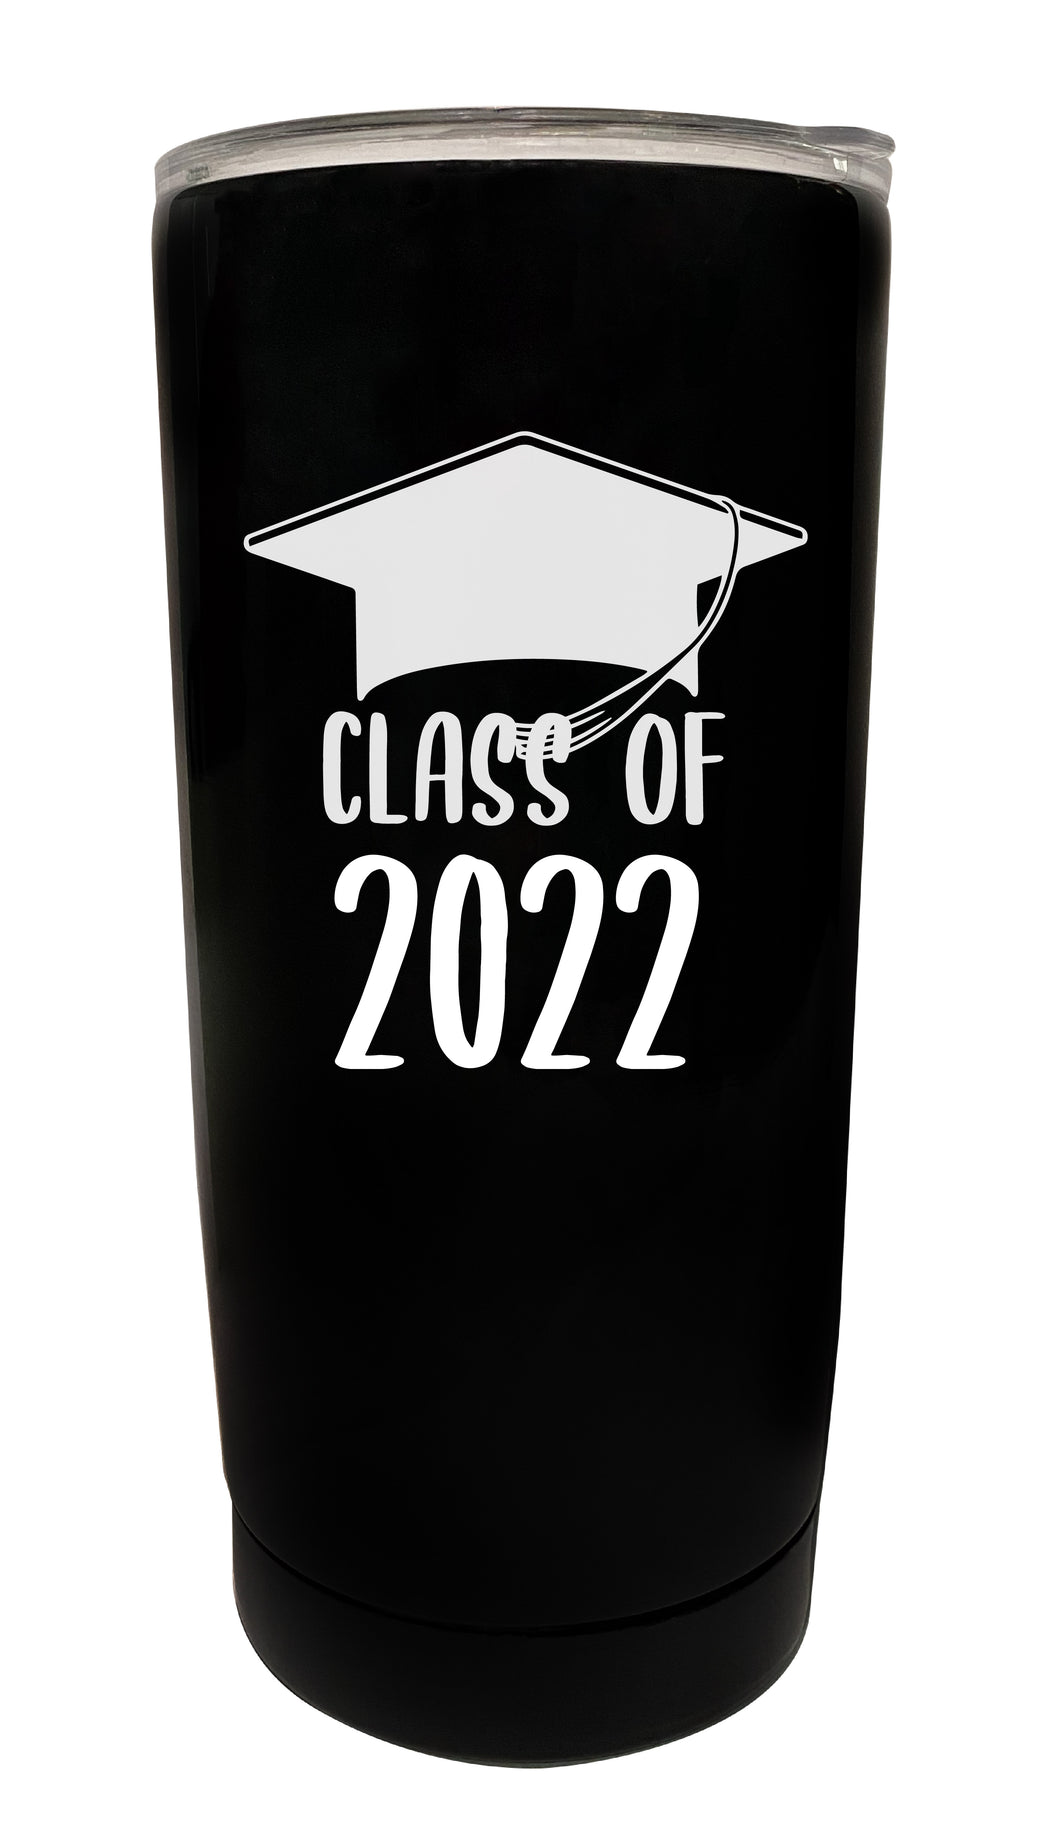 Class of 2022 Graduation 16 oz Insulated Stainless Steel Tumbler